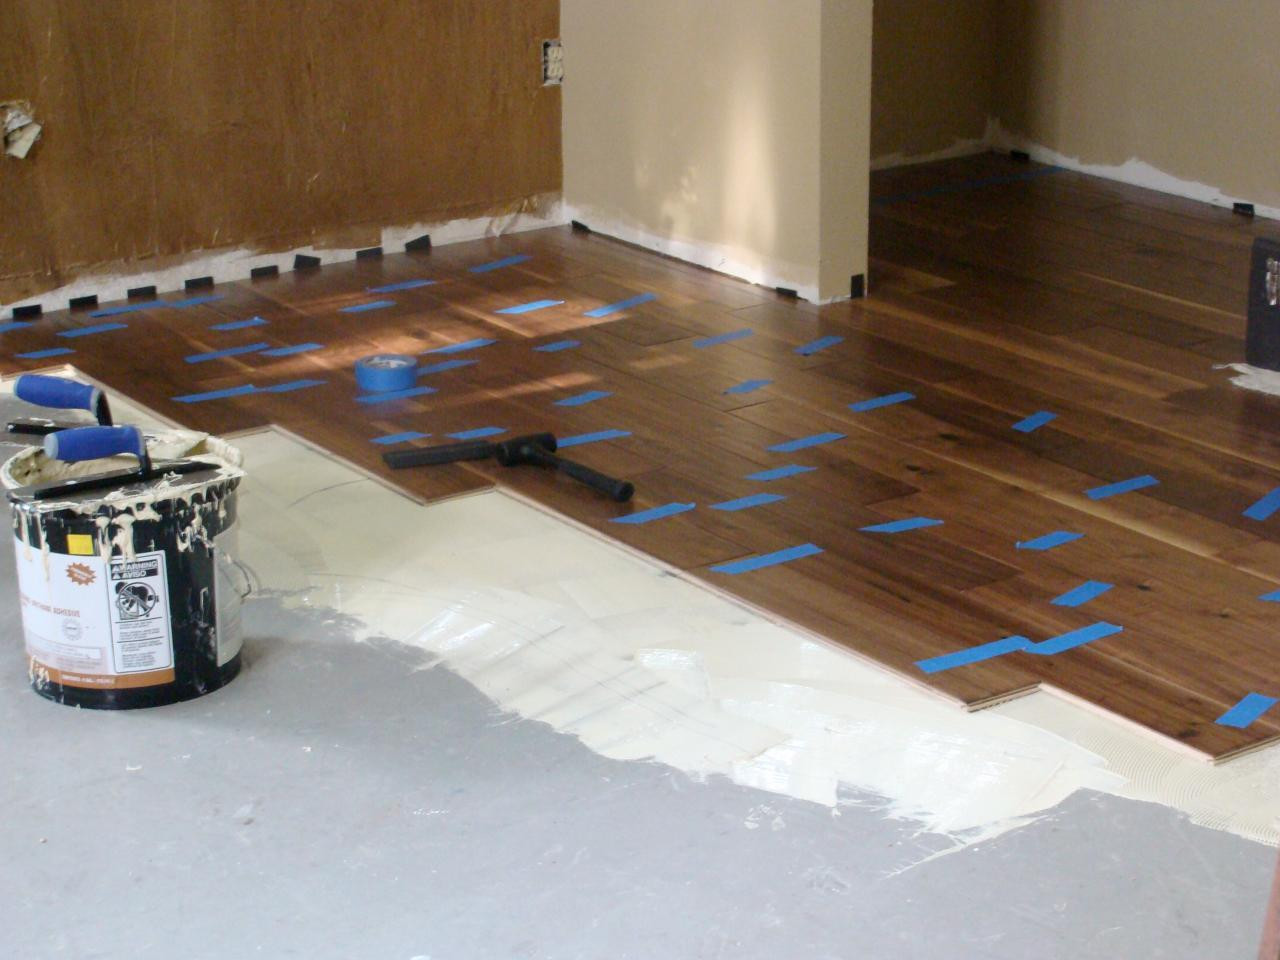 18 Famous How Do You Refinish Hardwood Floors Yourself 2024 free download how do you refinish hardwood floors yourself of luxury of diy wood floor refinishing collection inside things to know before refinishing old hardwood floors refinishing hardwood floors the f